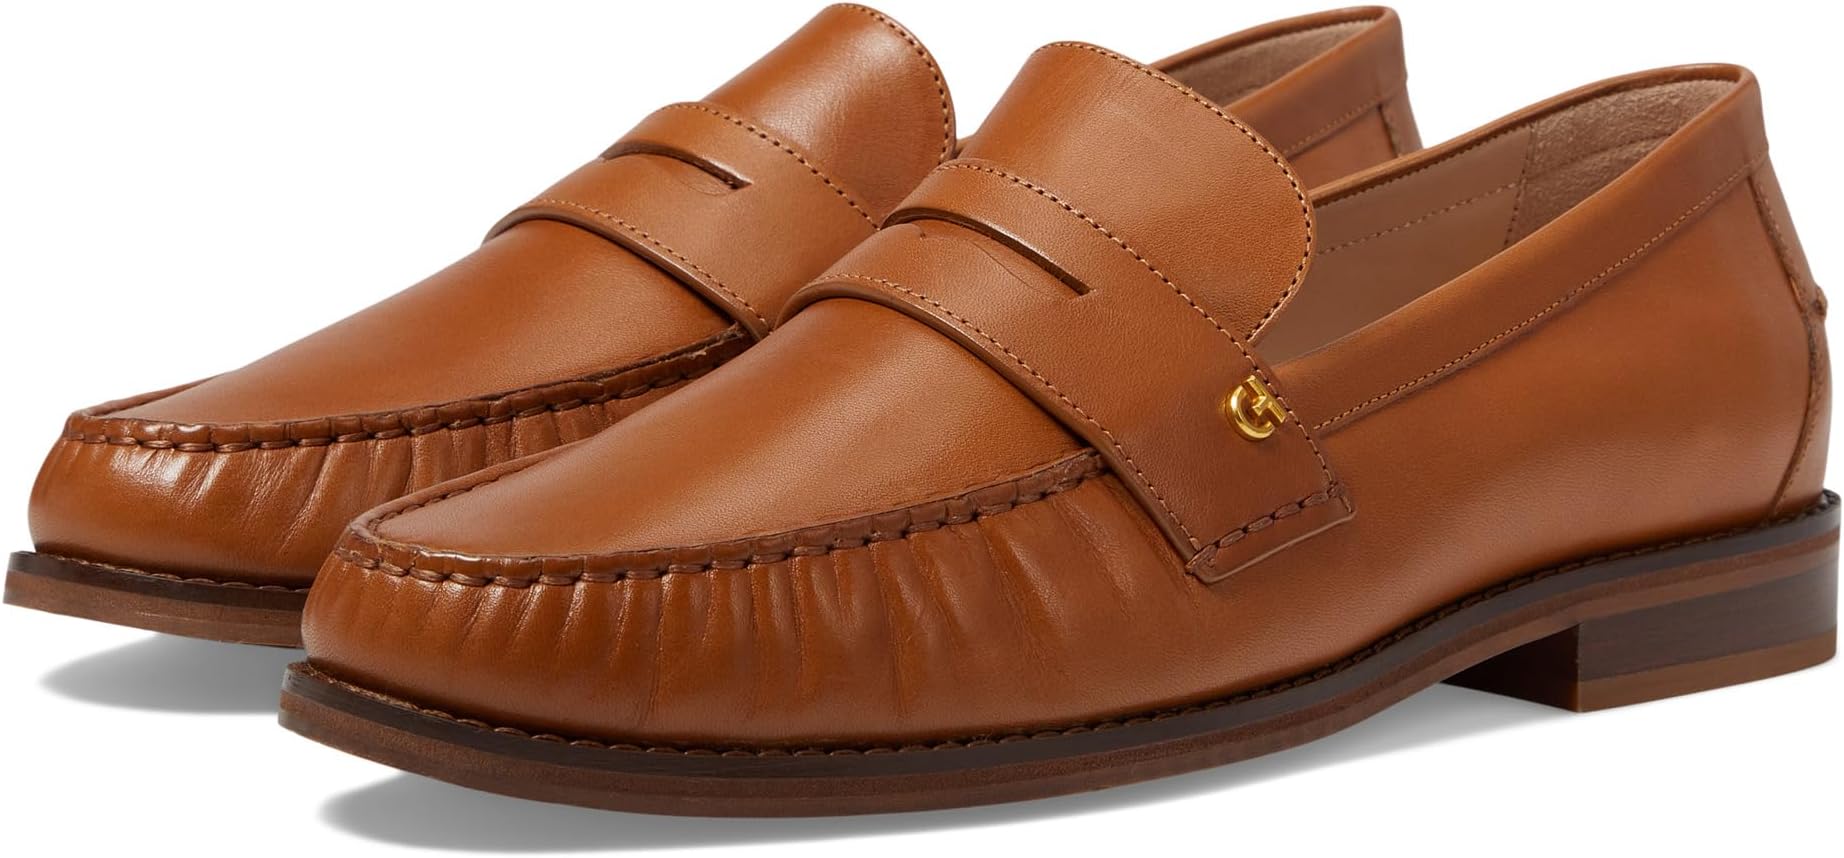 Лоферы Lux Pinch Penny Loafer Cole Haan, цвет Pecan Leather цена и фото